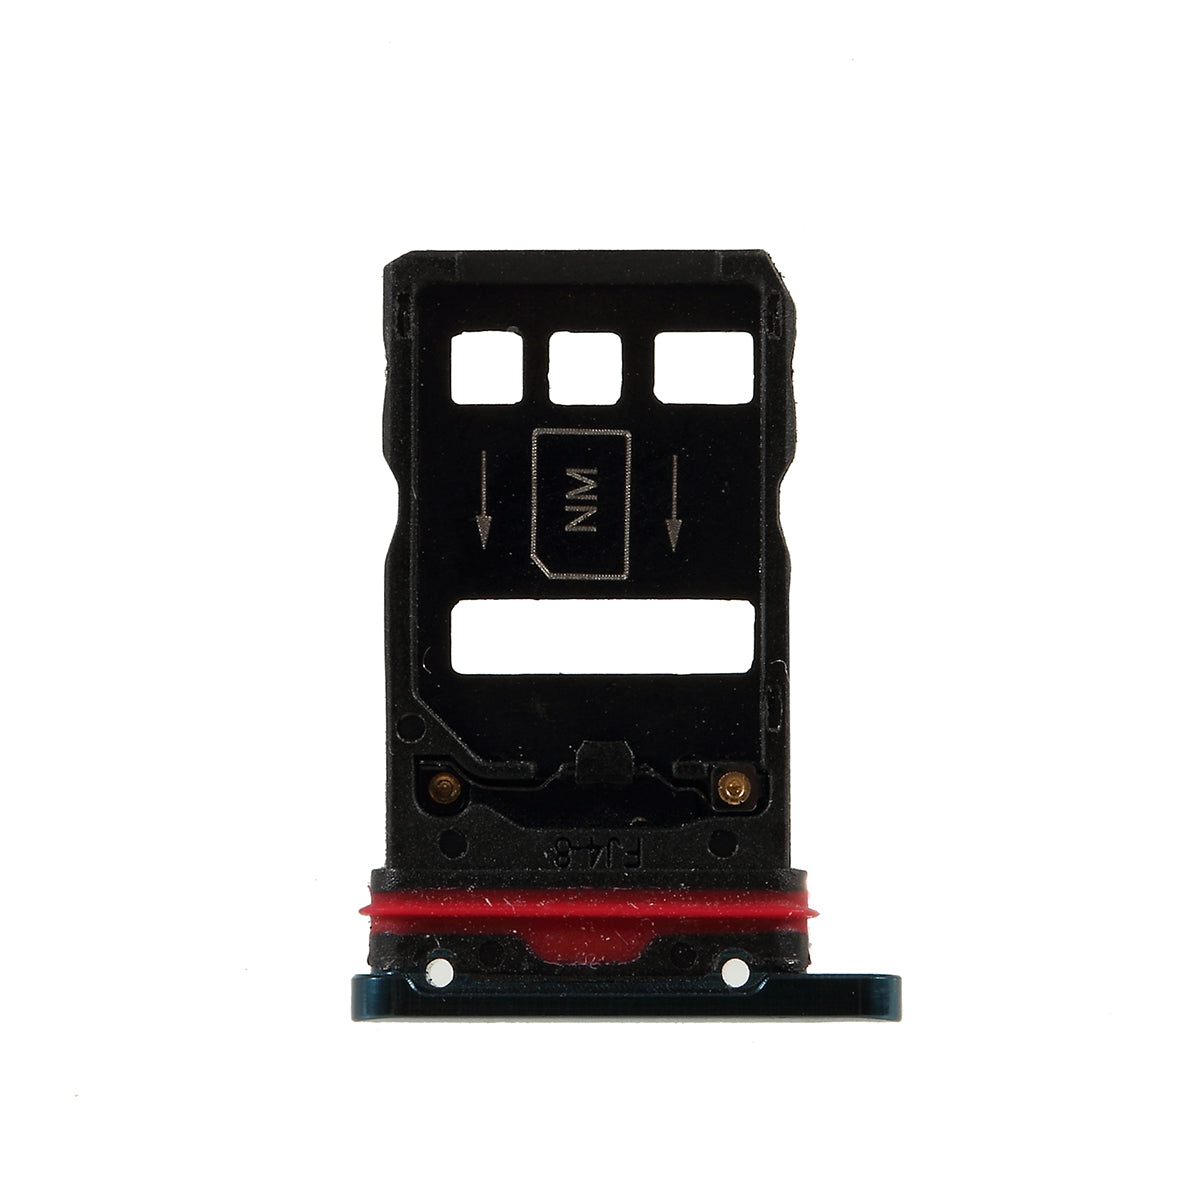 OEM Dual SIM Micro SD Card Tray Holder Replacement for Huawei Mate 20 Pro - Green